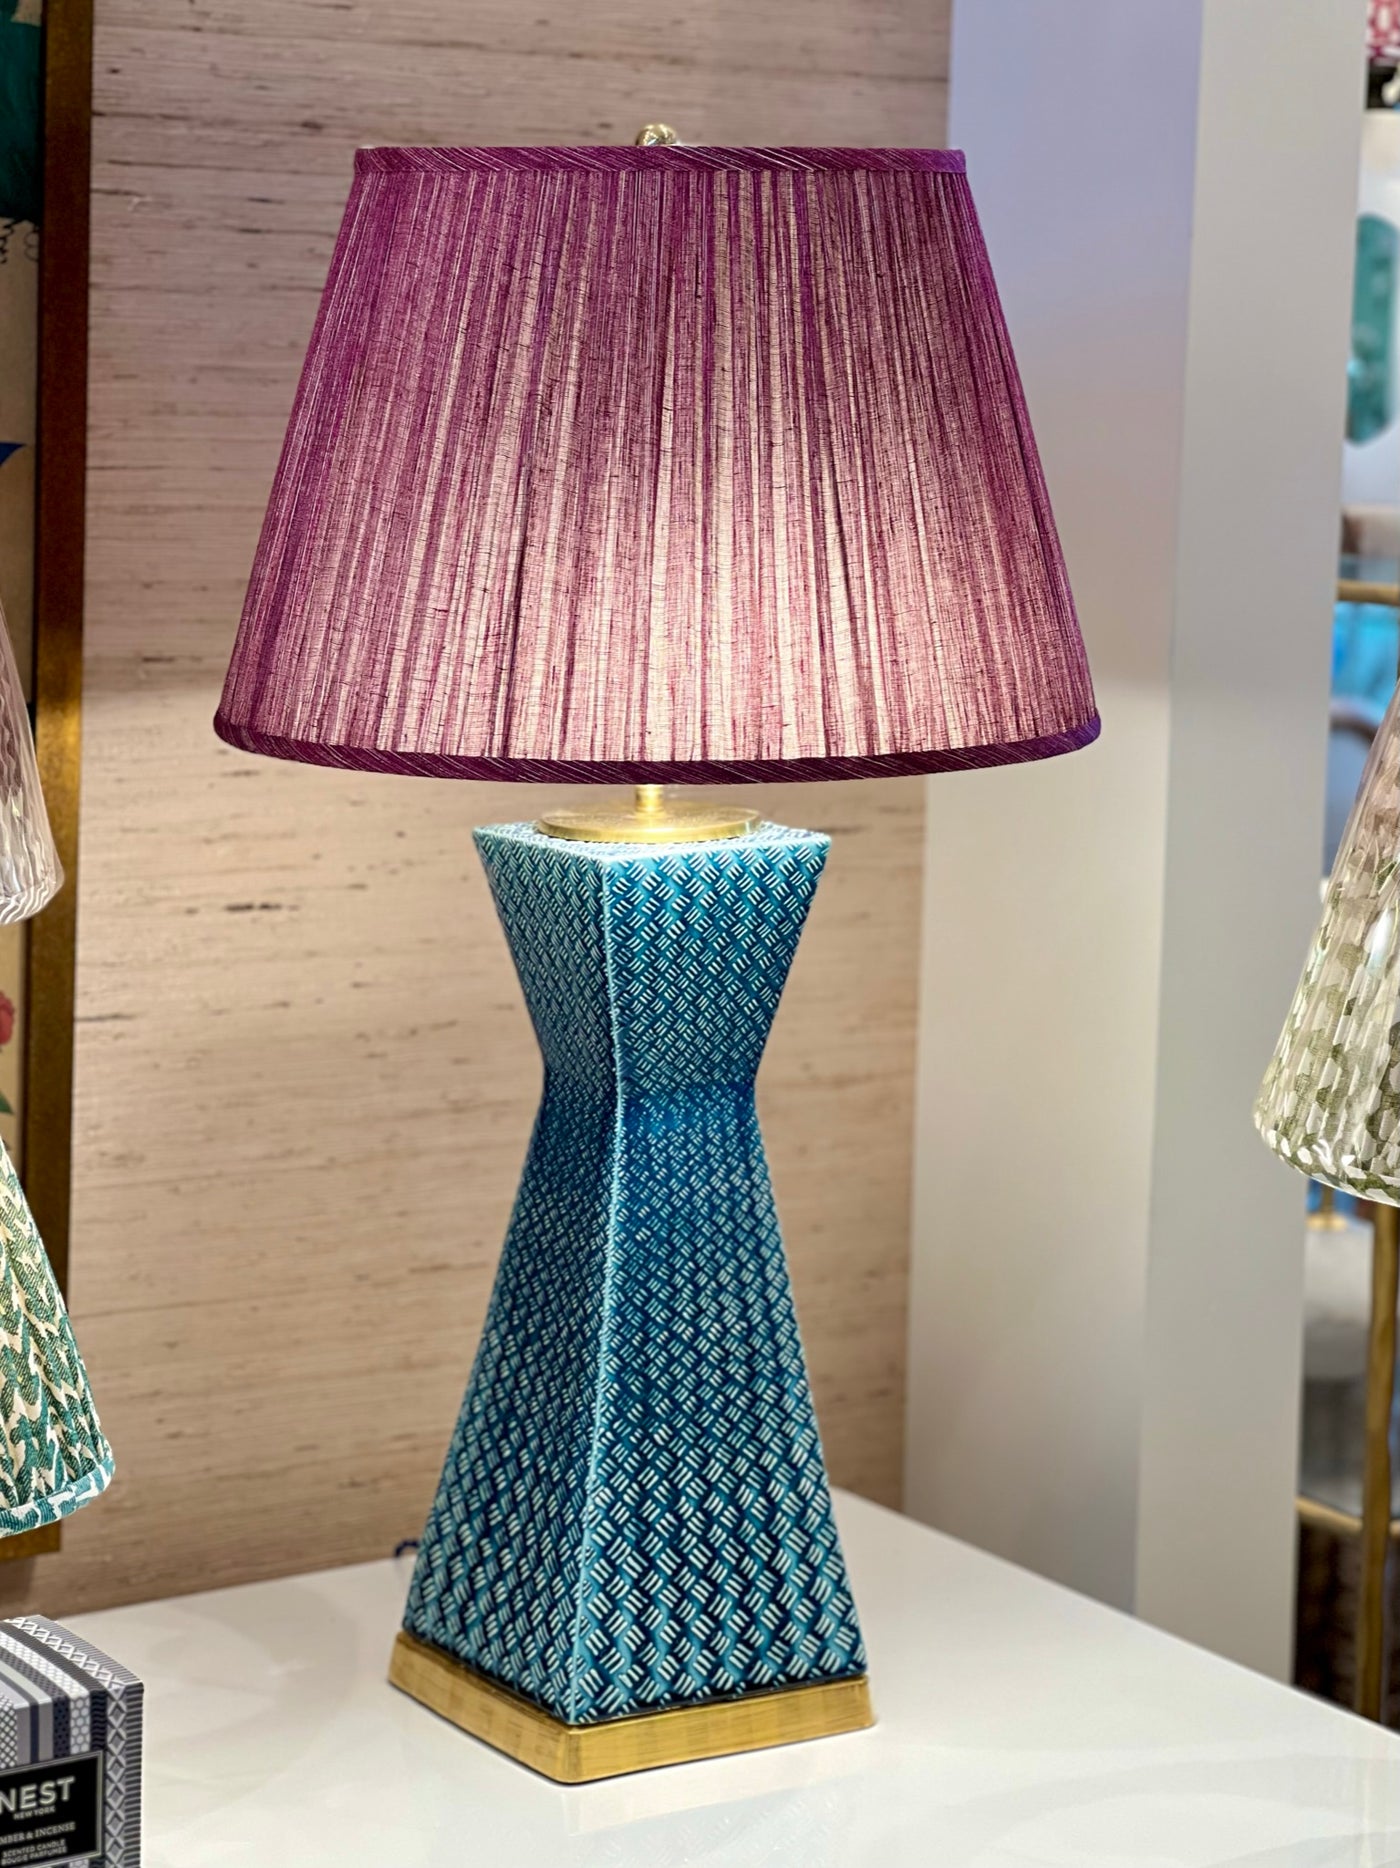 Christopher Spitzmiller Lamp and Fermoie Lampshade